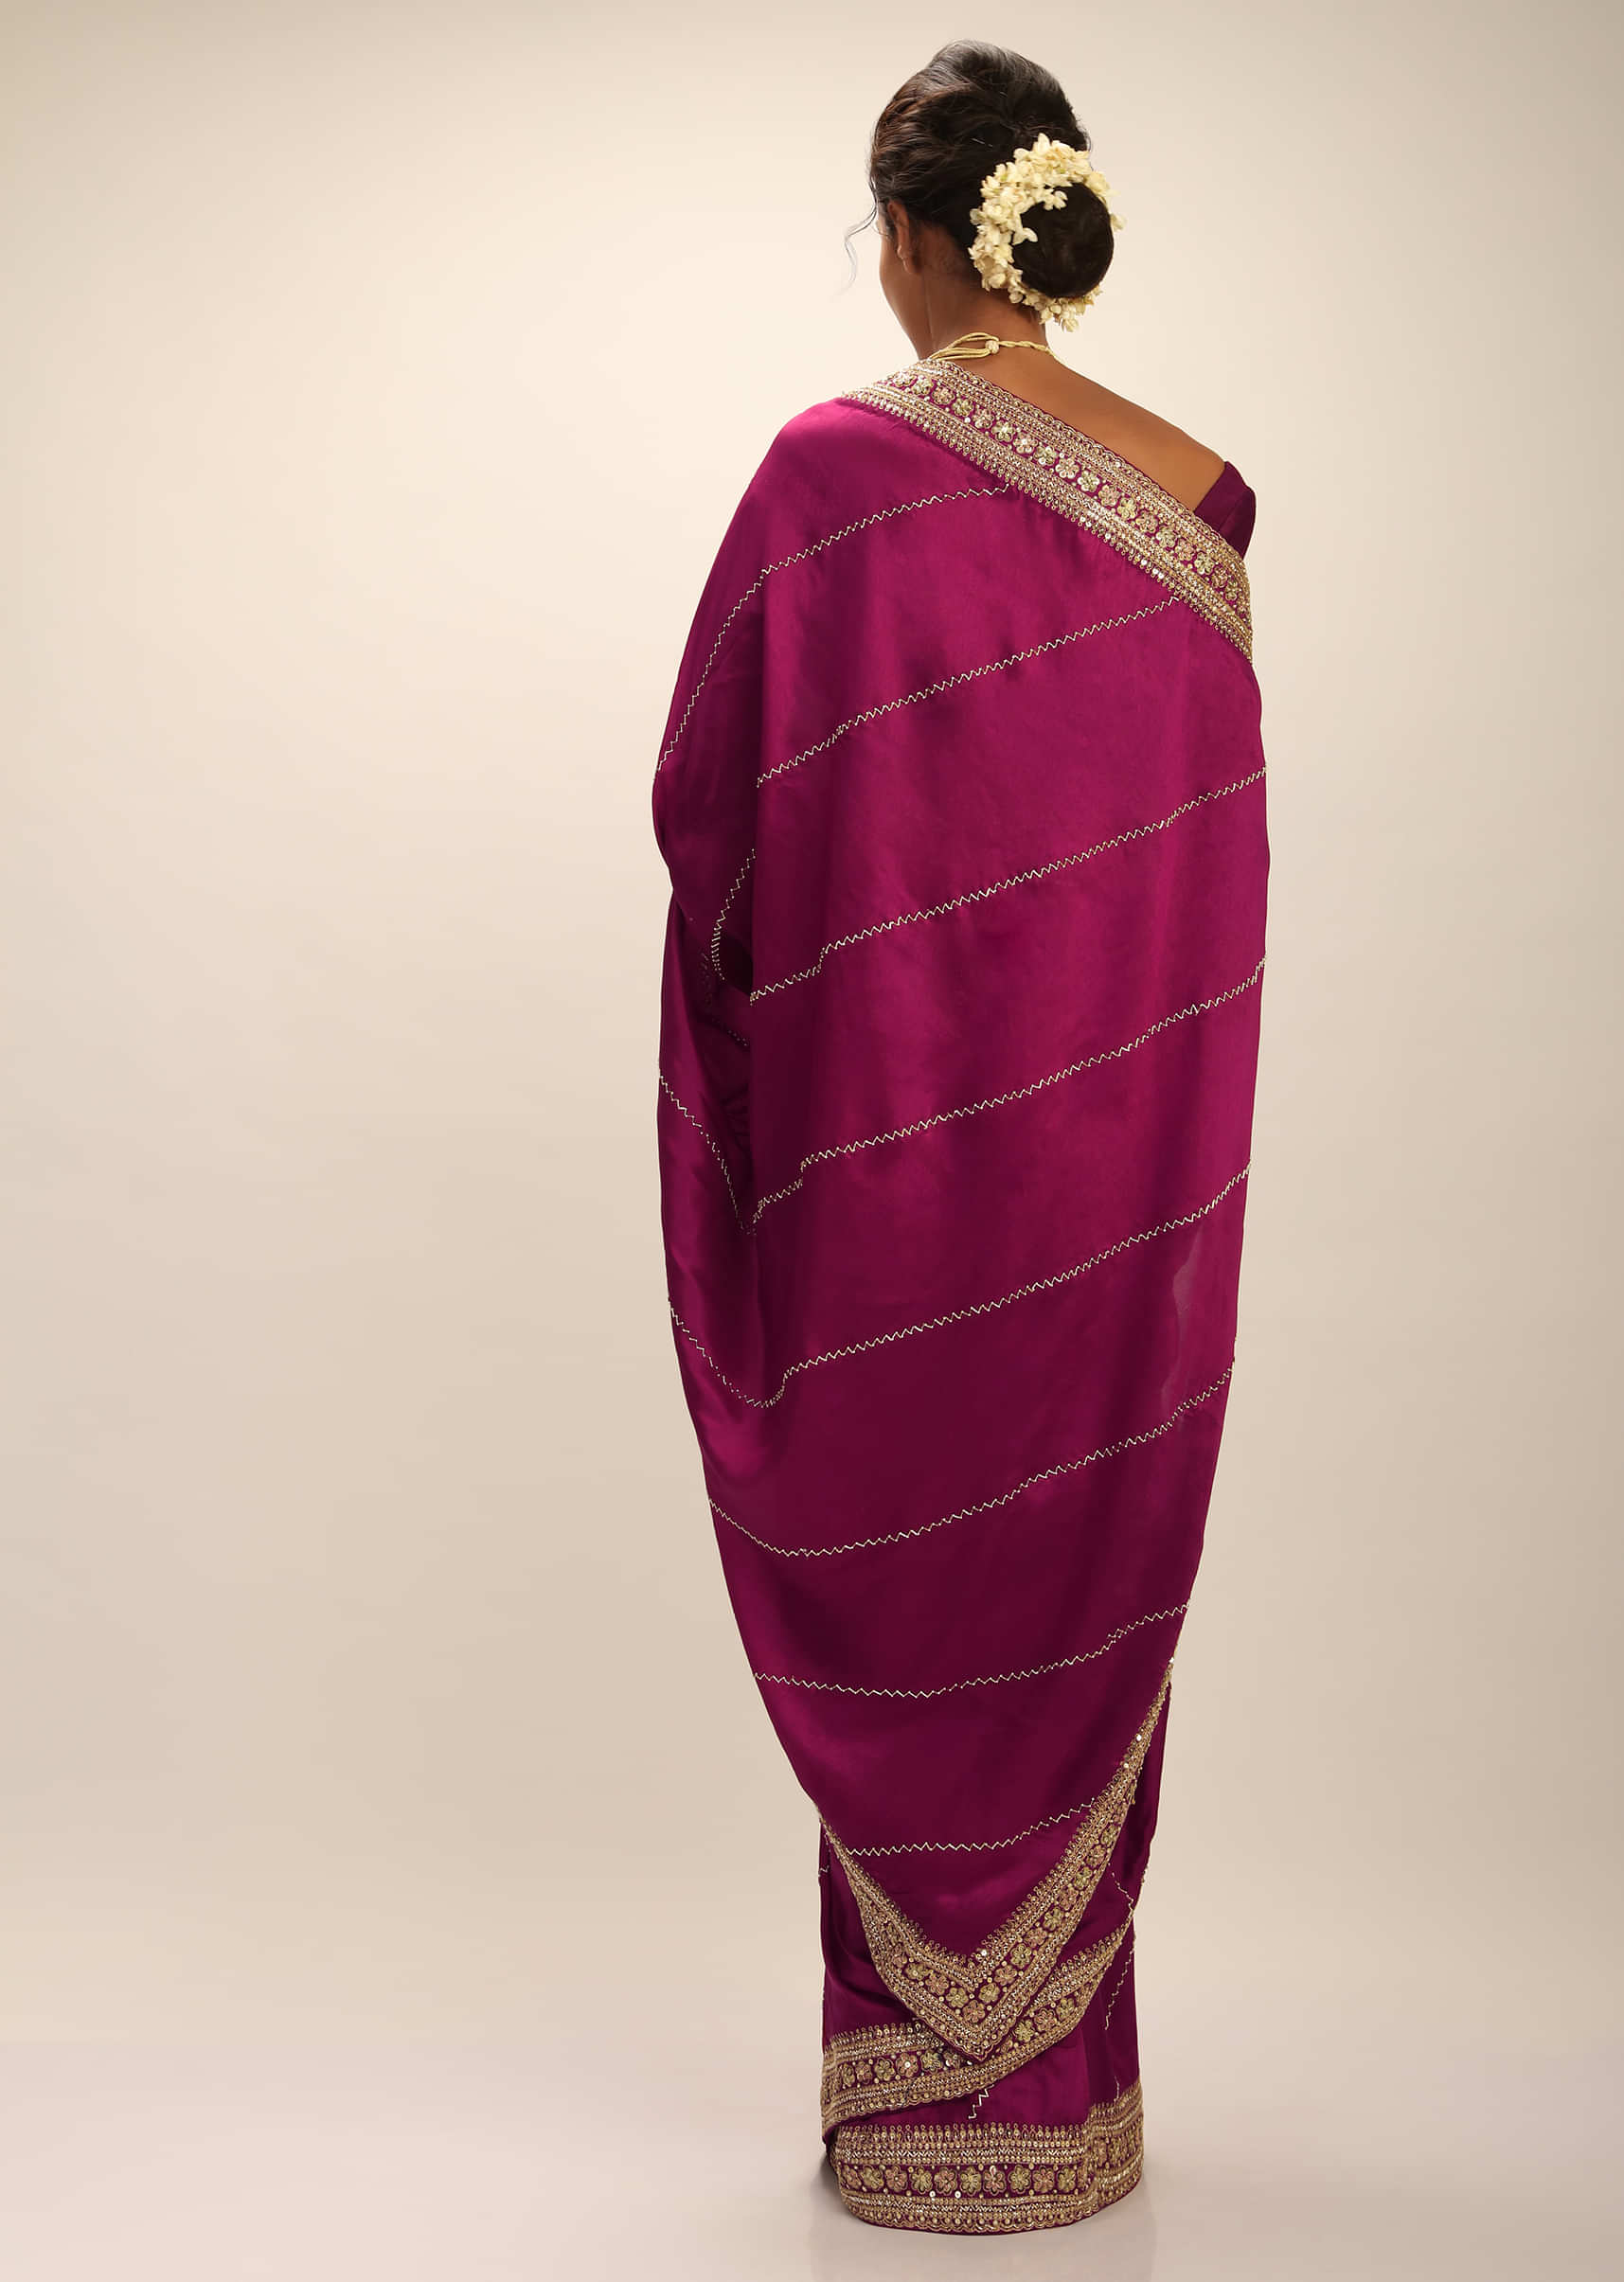 Wine Purple Saree In Dupion Silk With Cut Dana And Moti Embroidered Stripes And Floral Border  